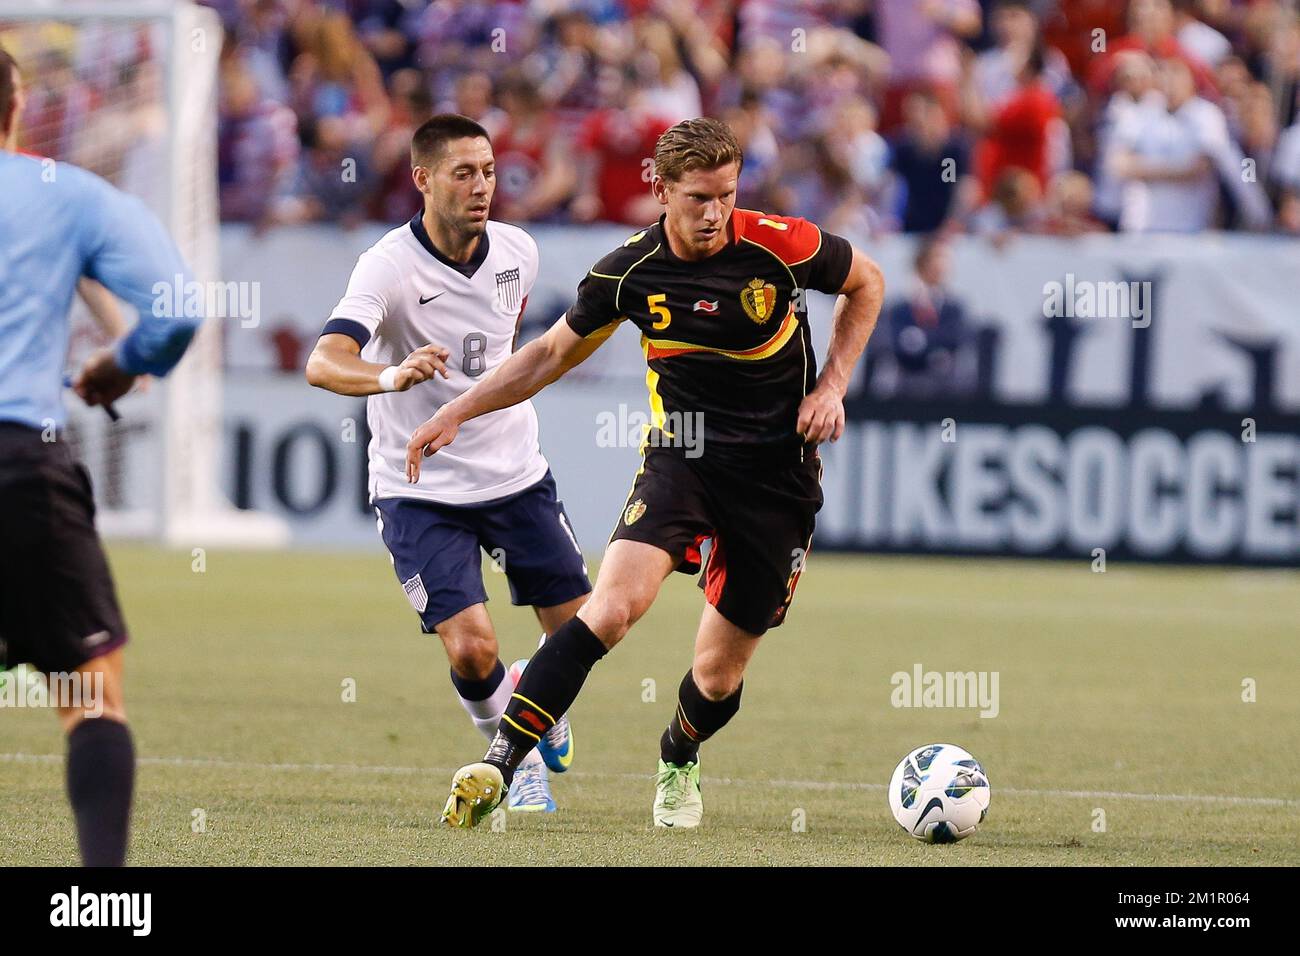 Clint Dempsey and Belgium's Jan Vertonghen fight for the ball during a friendly game of Belgian national team against USA in the FirstEnergyStadium in Cleveland, United States, Wednesday 29 May 2013. Red Devils are preparing for their qualification game for the 2014 FIFA World Cup against Serbia on June 7.  Stock Photo